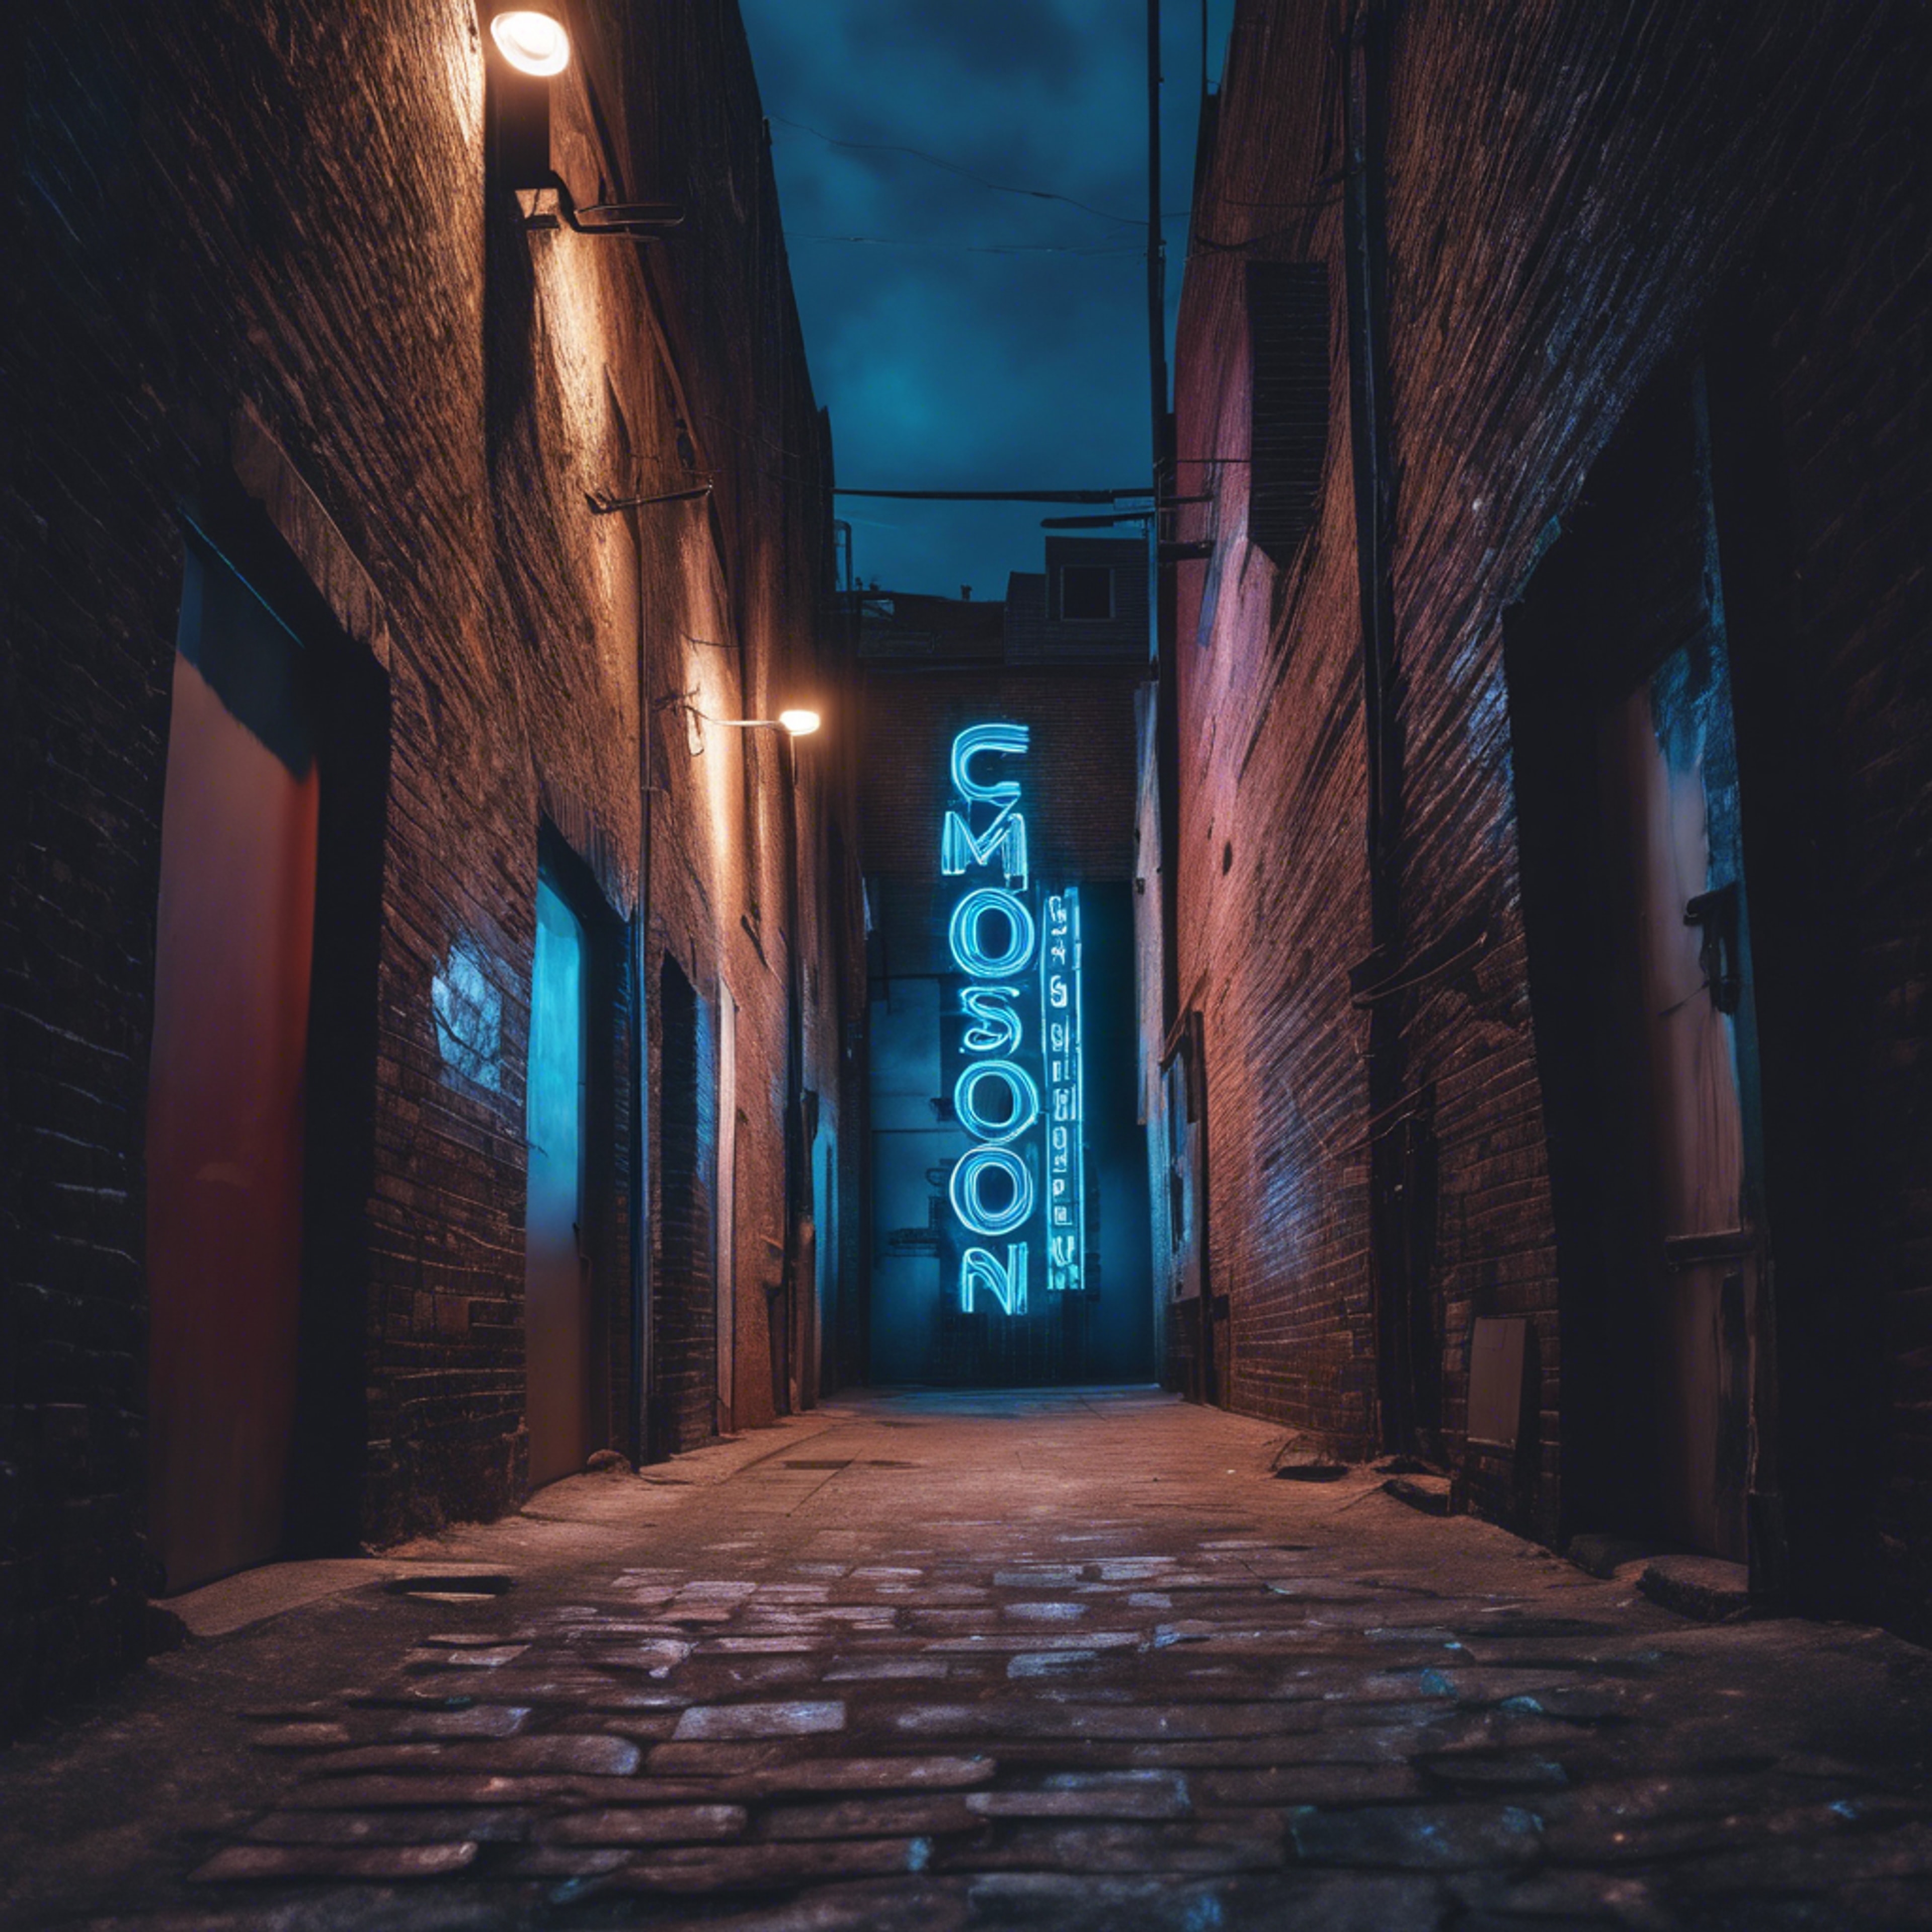 A cool blue neon sign glowing in a dark alley ورق الجدران[2a7b25783bff4a339087]